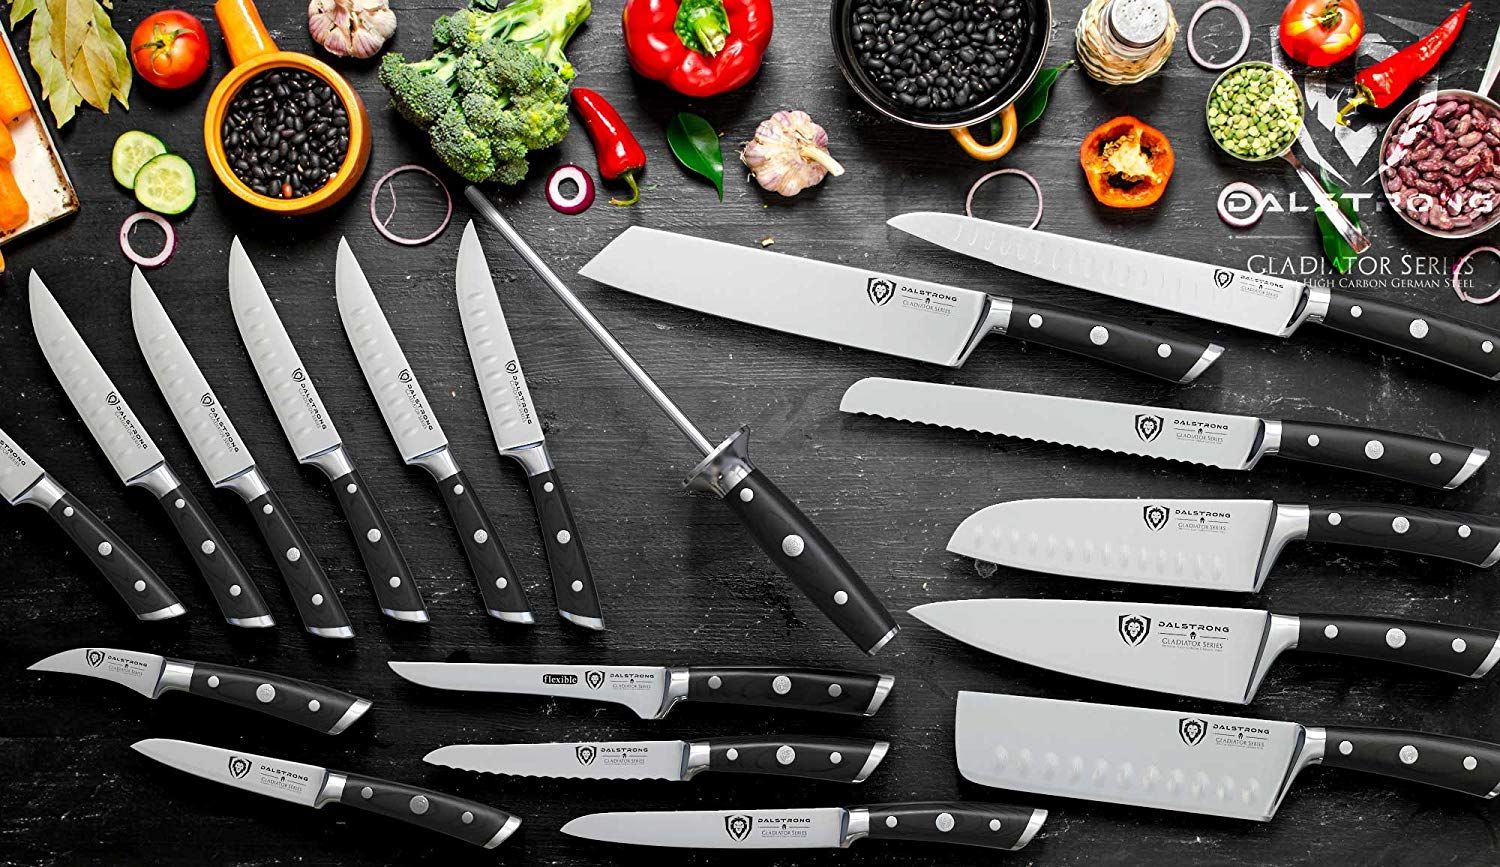 Dalstrong Chef Knives Are up to 75% off on